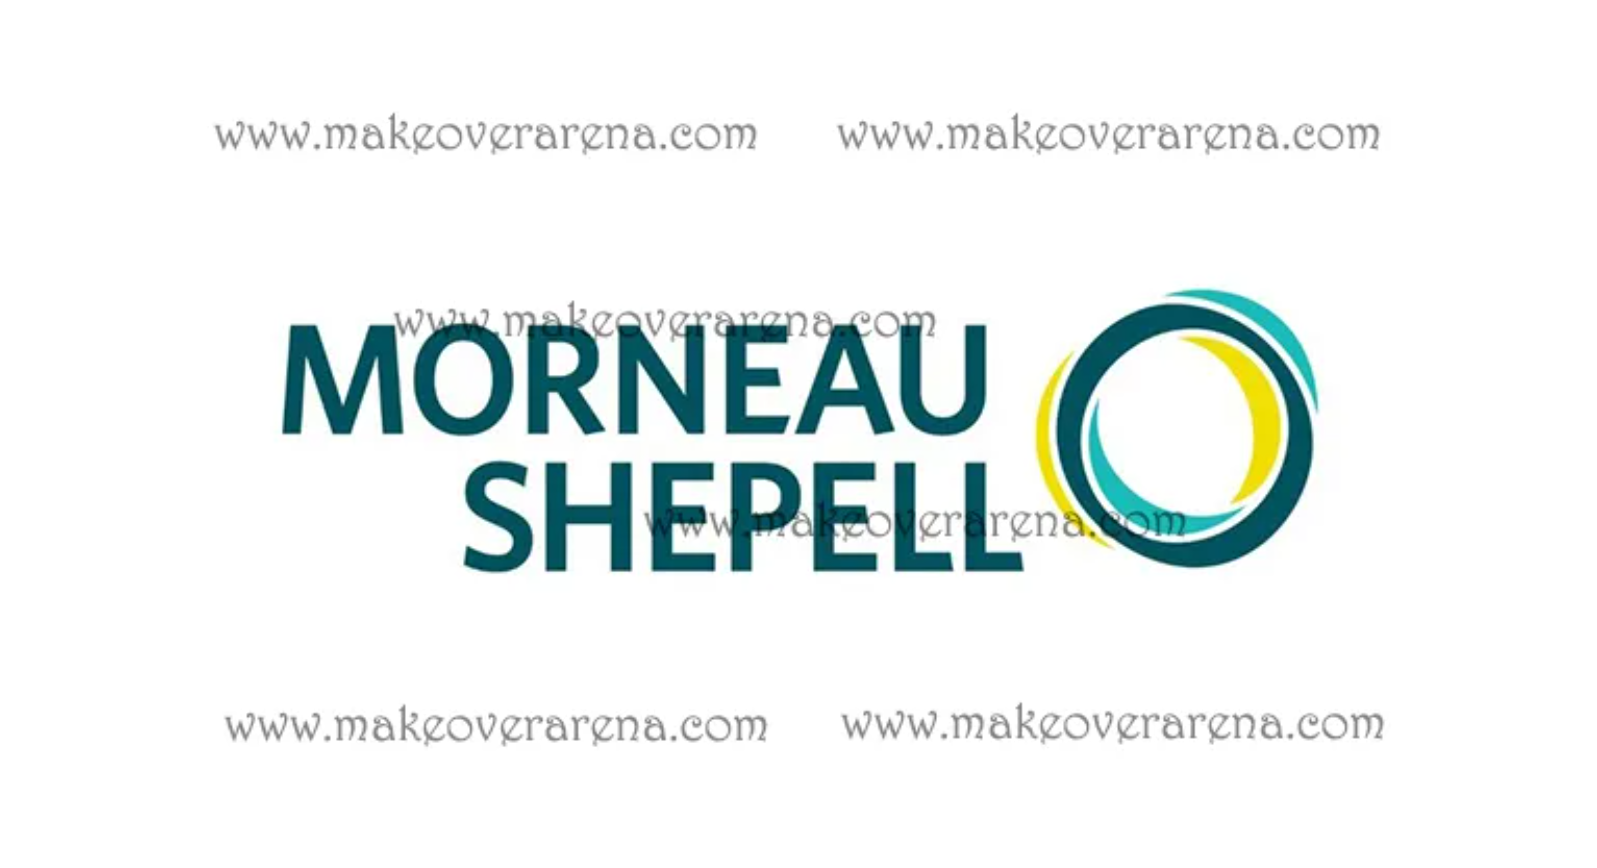 Morneau Shepell – Morneau Shepell Blog, Services And Careers